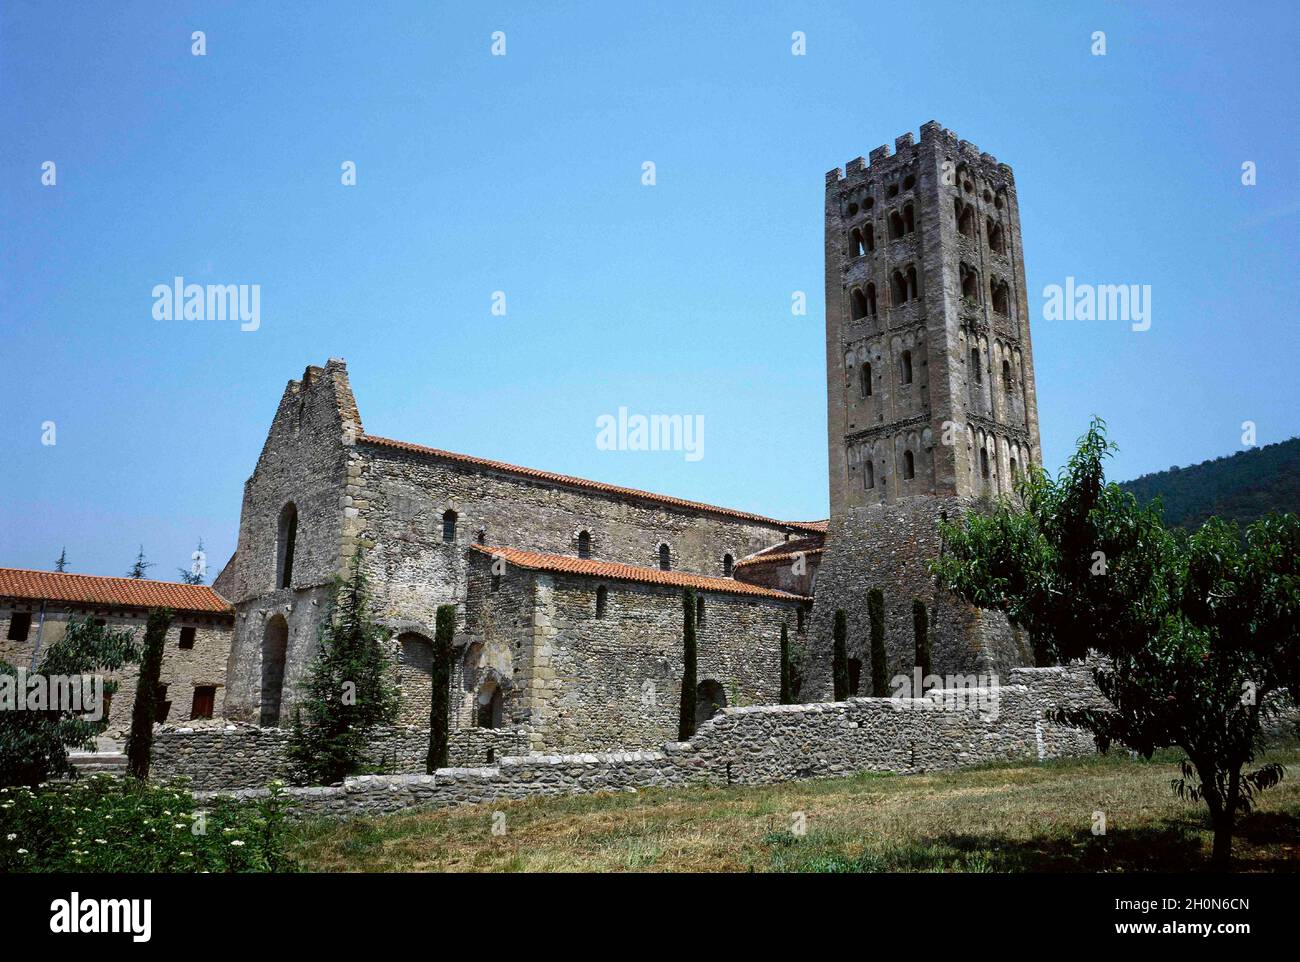 France. Pyrenees-Orientales departament. Occitanie Region. The Abbey of Saint-Michel de Cuxa. Benedictine abbey, consecrated in 974. Exterior view of Stock Photo